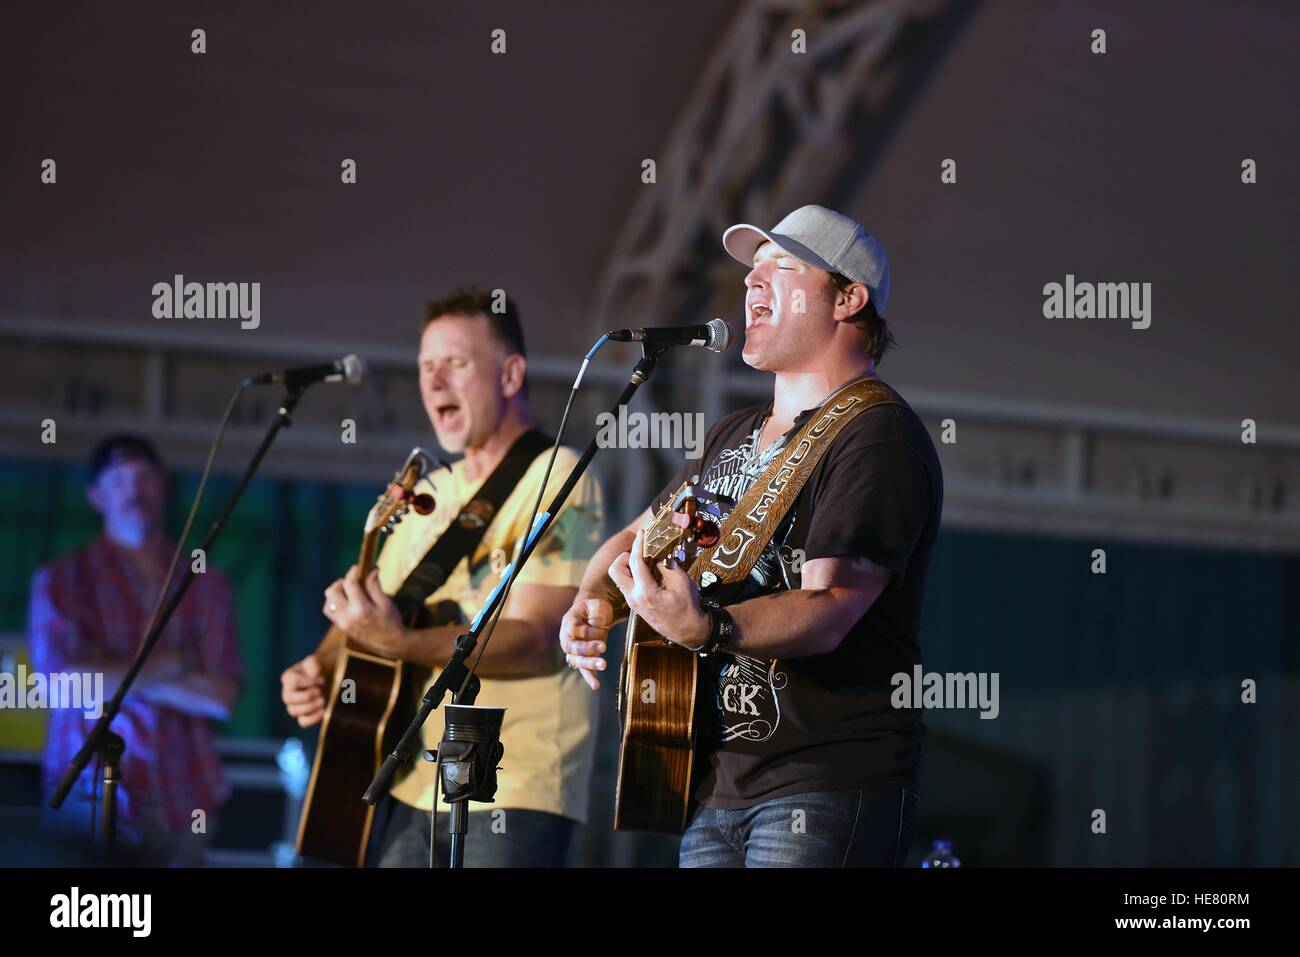 Guitarist Timothy Teague (left) and country music singer Jerrod Niemann perform for U.S. troops at a National Guard USO Tour May 18, 2016 in Kuwait. Stock Photo